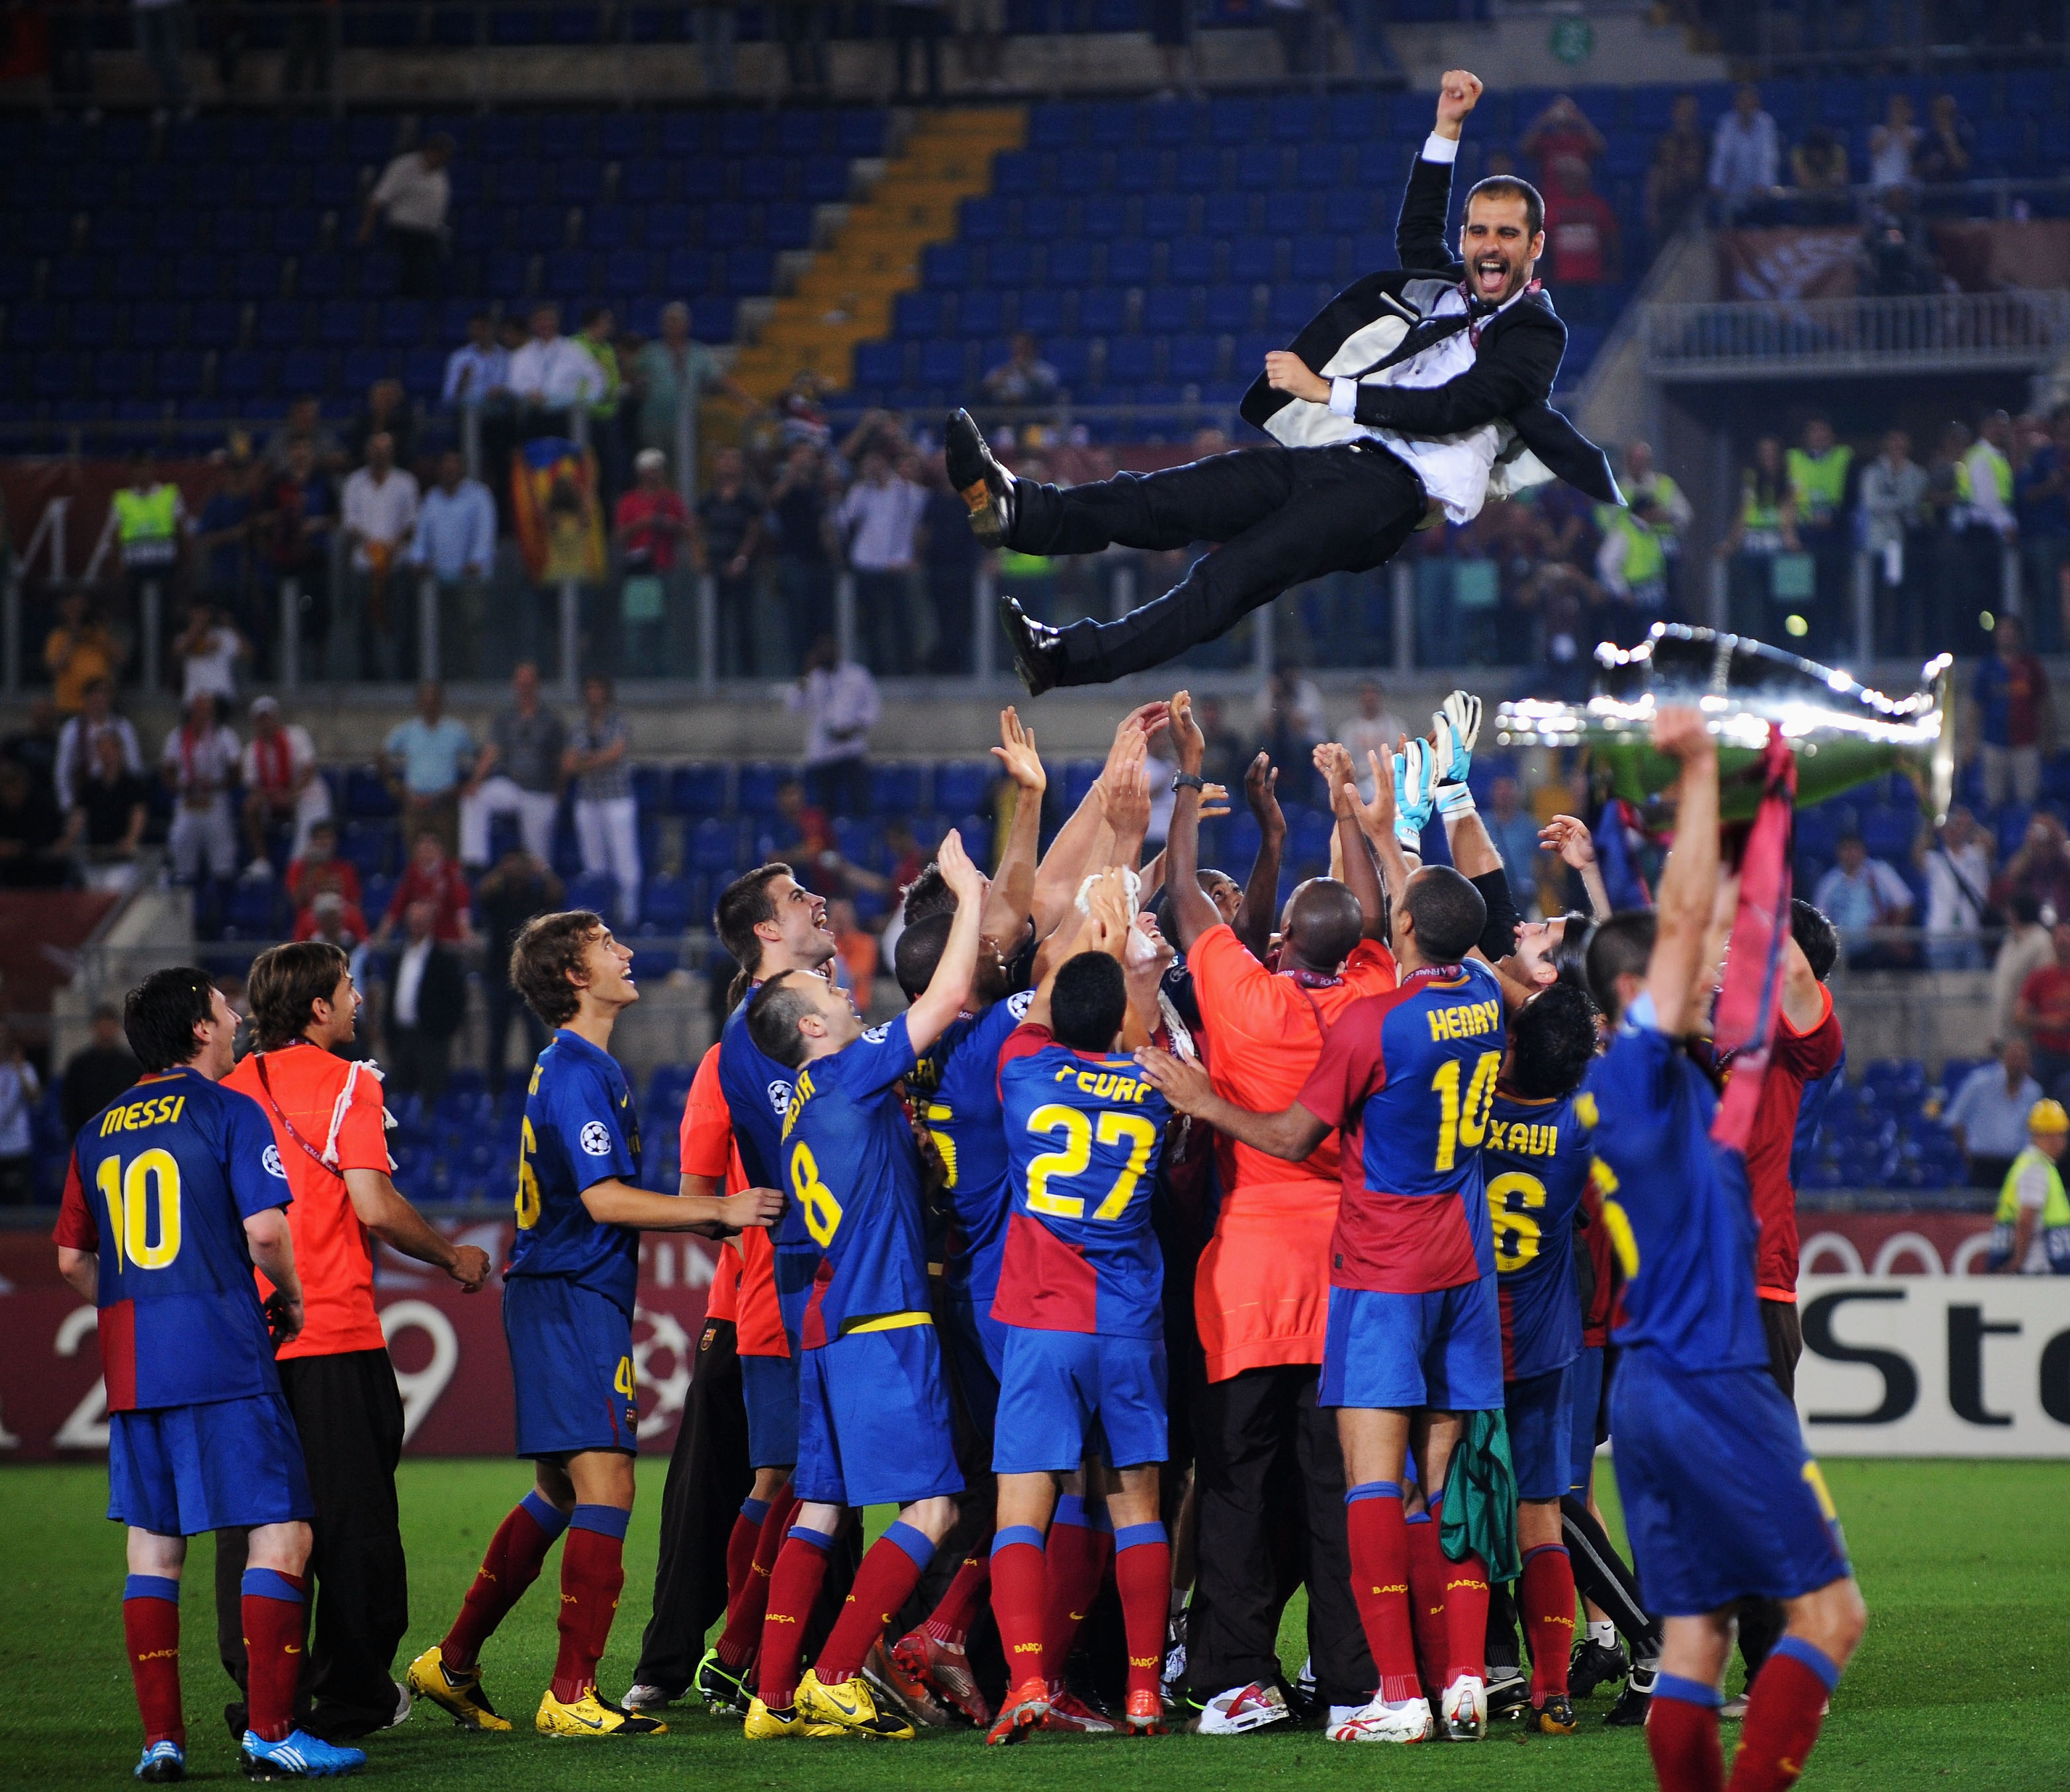 ROME - MAY 27:  Josep Guardiola coach of Barcelona is  thrown into the air by his players as they celebrate winning the UEFA Champions League Final match between Manchester United and Barcelona at the Stadio Olimpico on May 27, 2009 in Rome, Italy.  (Phot